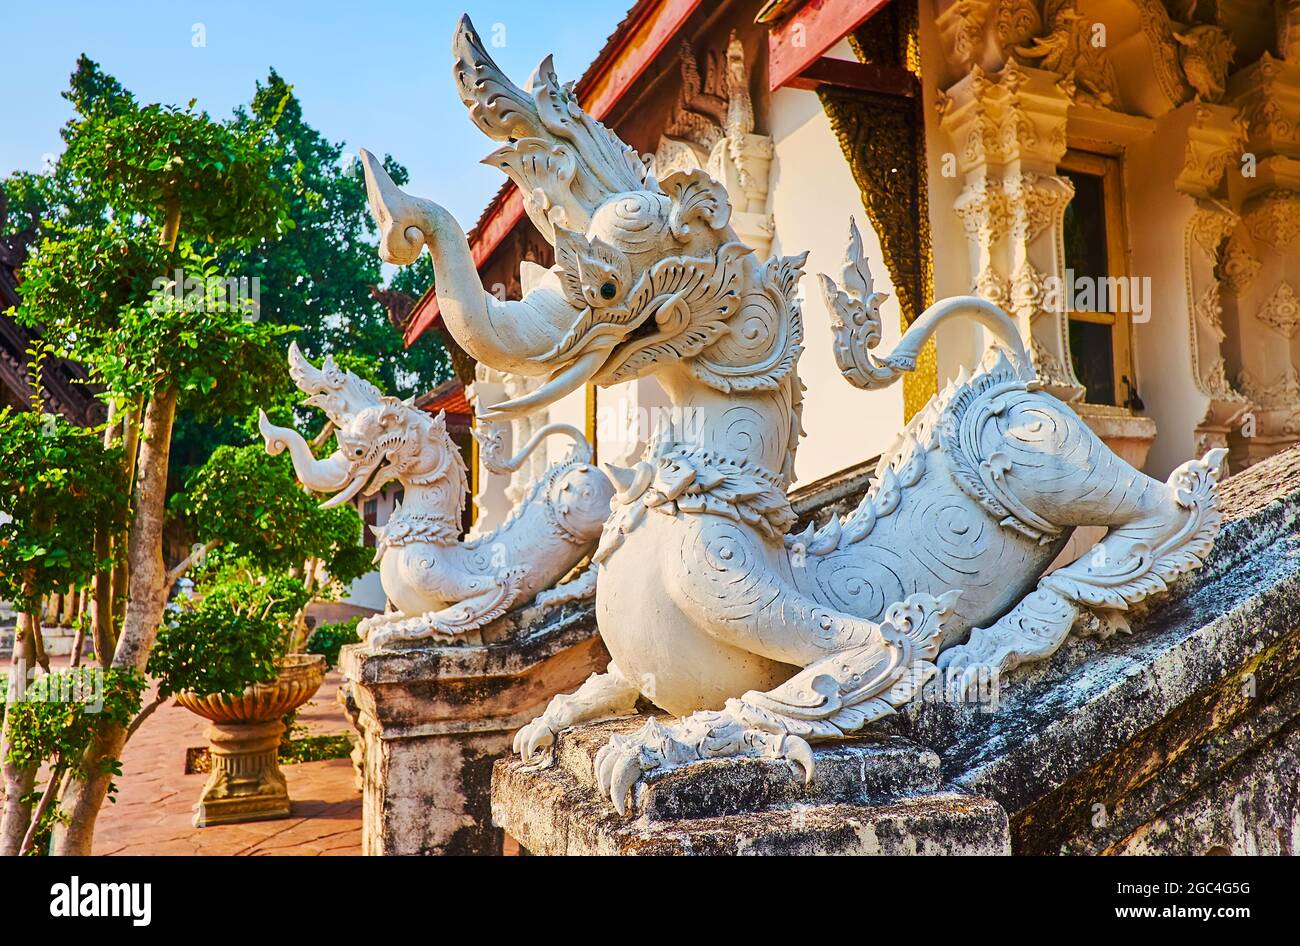 The sculptures of Kochasri mythical creatures with body of lion and head of the elephant at the Viharn of Wat Pratu Pong, Lampang, Thailand Stock Photo